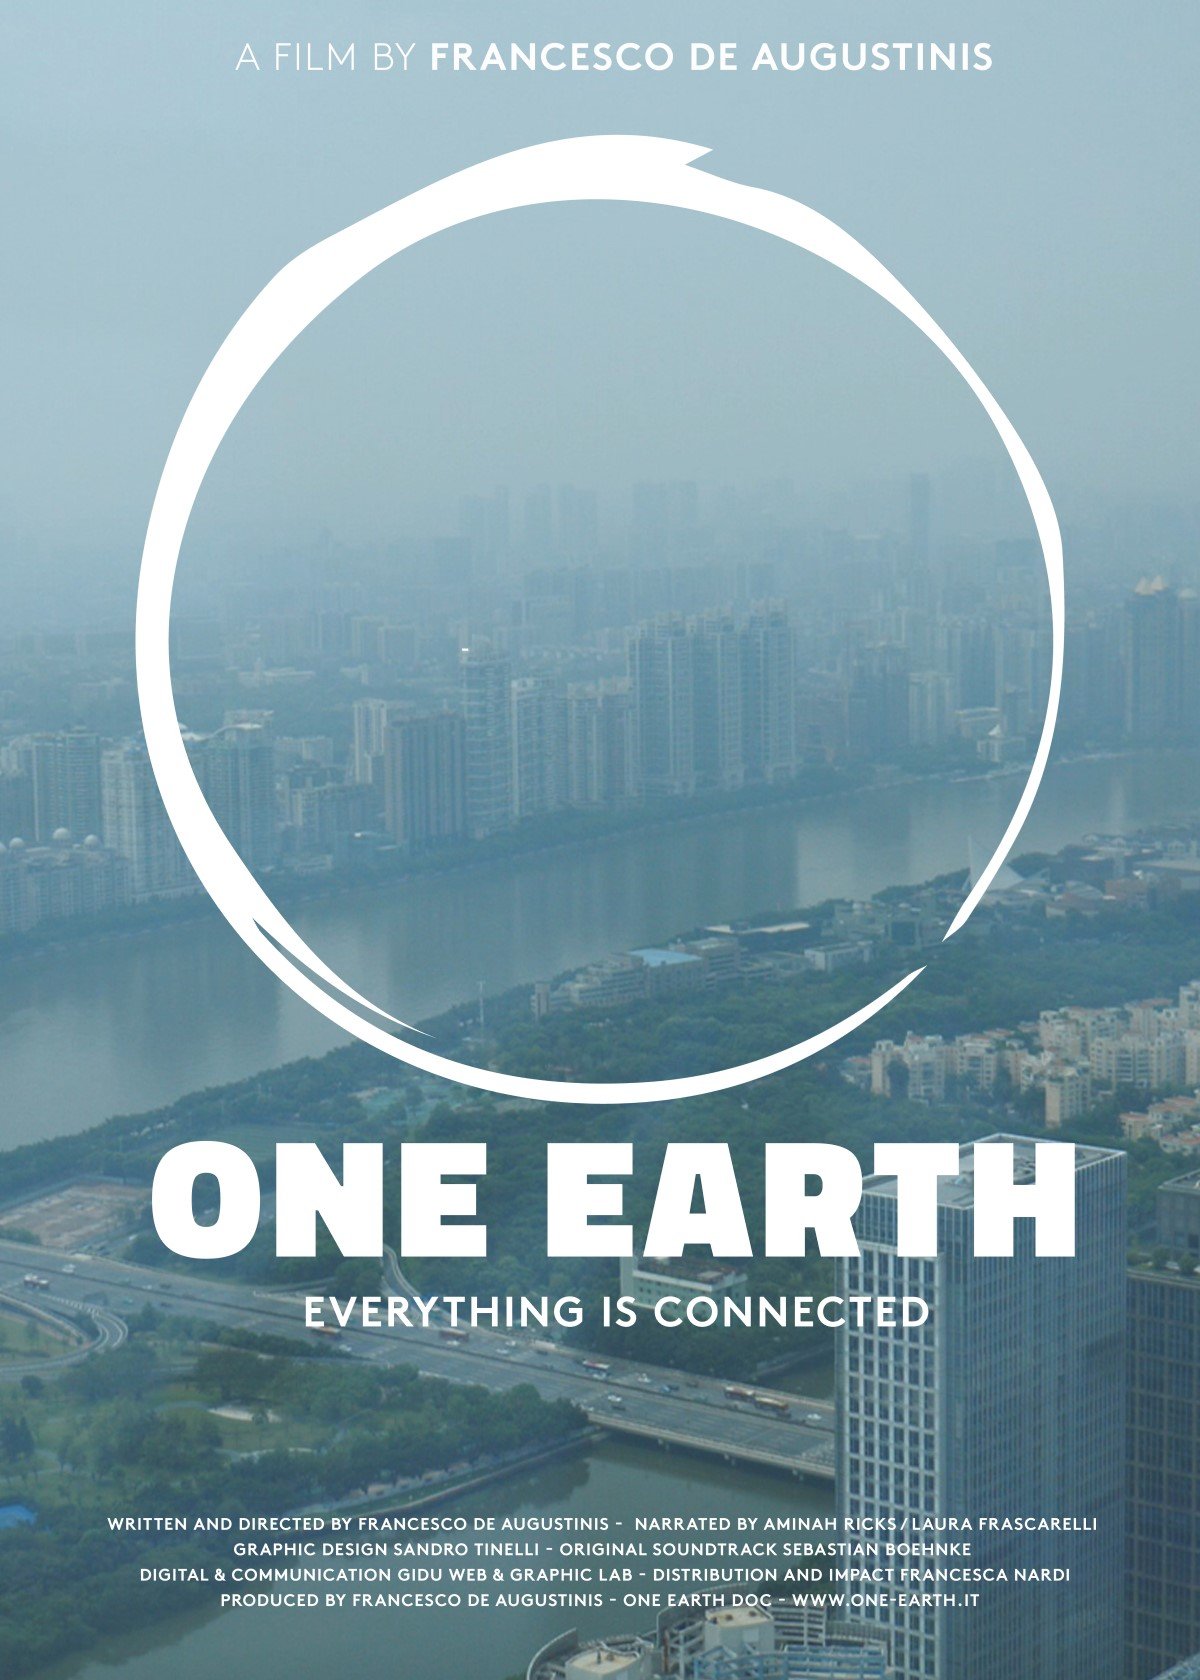 One Earth - Everything is connected